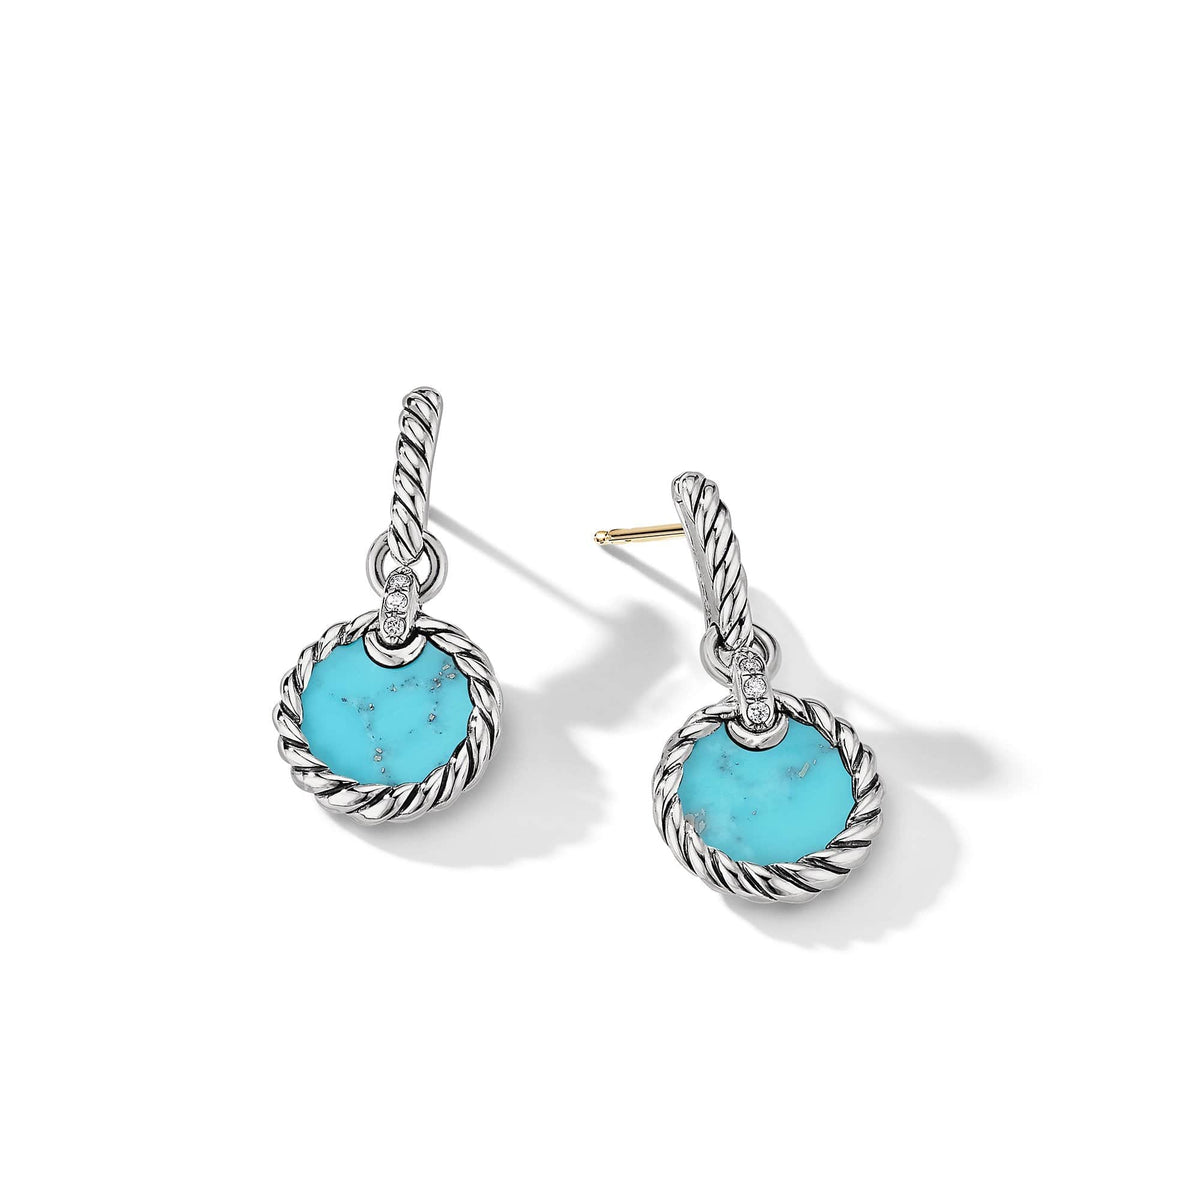 DY Elements Drop Earrings with Turquoise and Pavé Diamonds